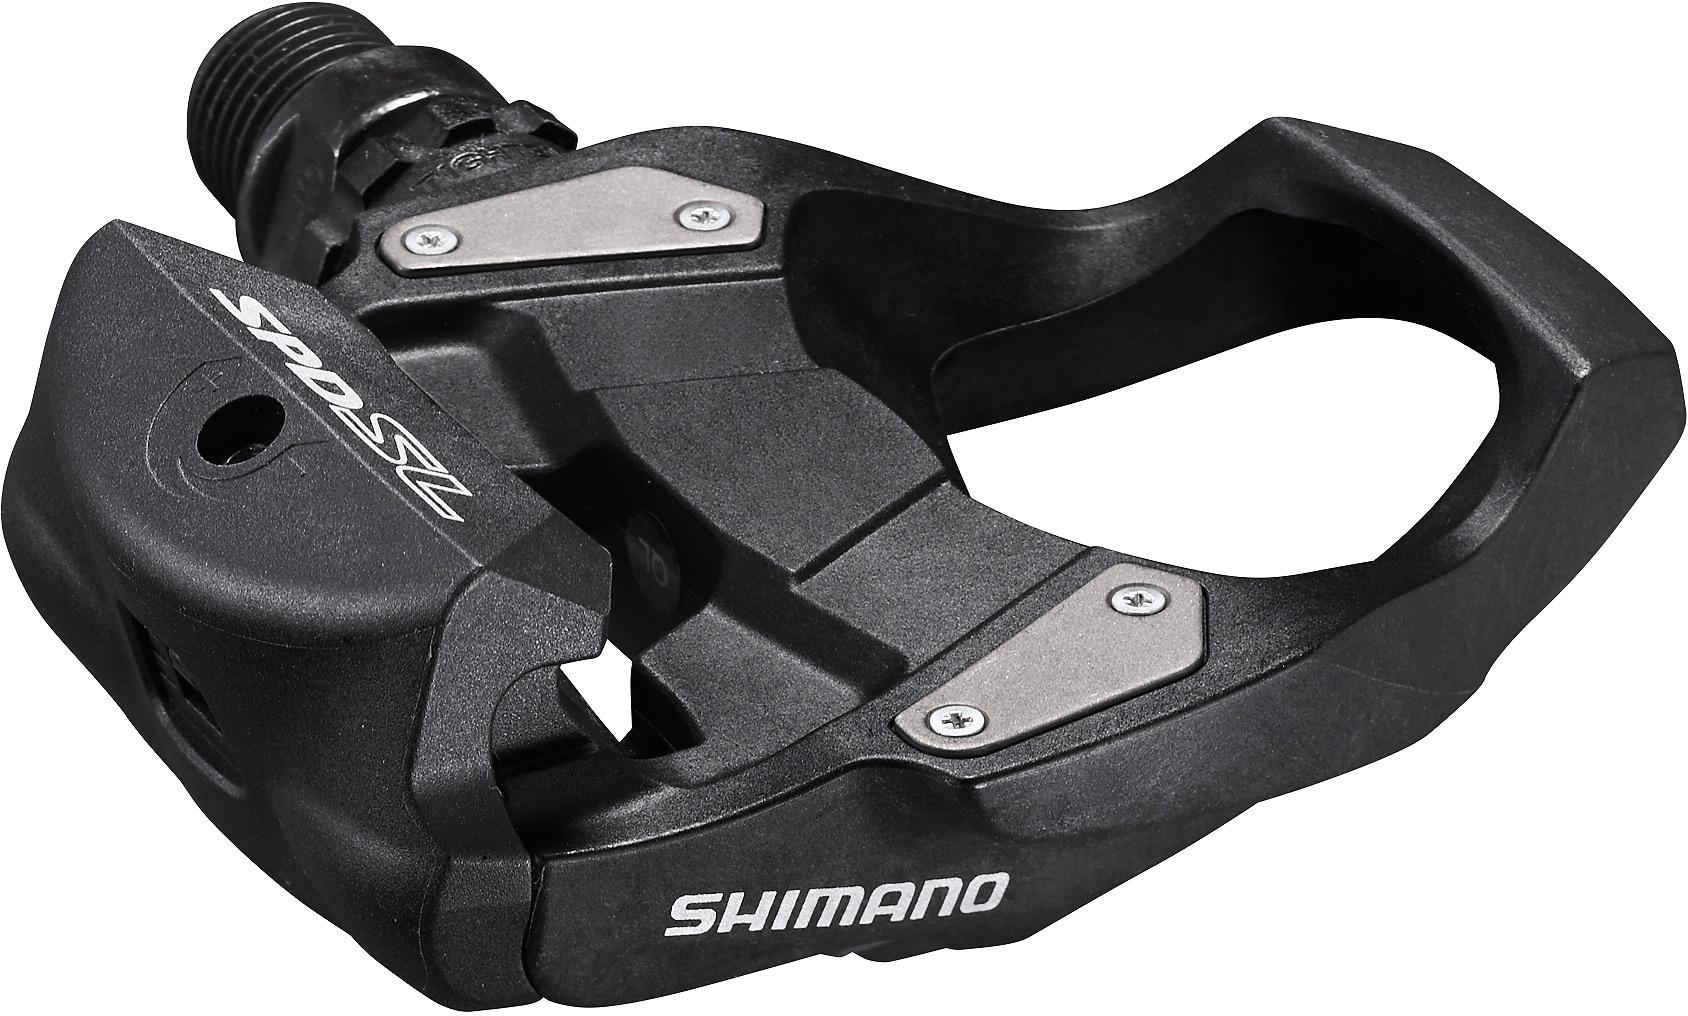 Shimano Rs500 Spd-sl Clipless Road Pedals  Black